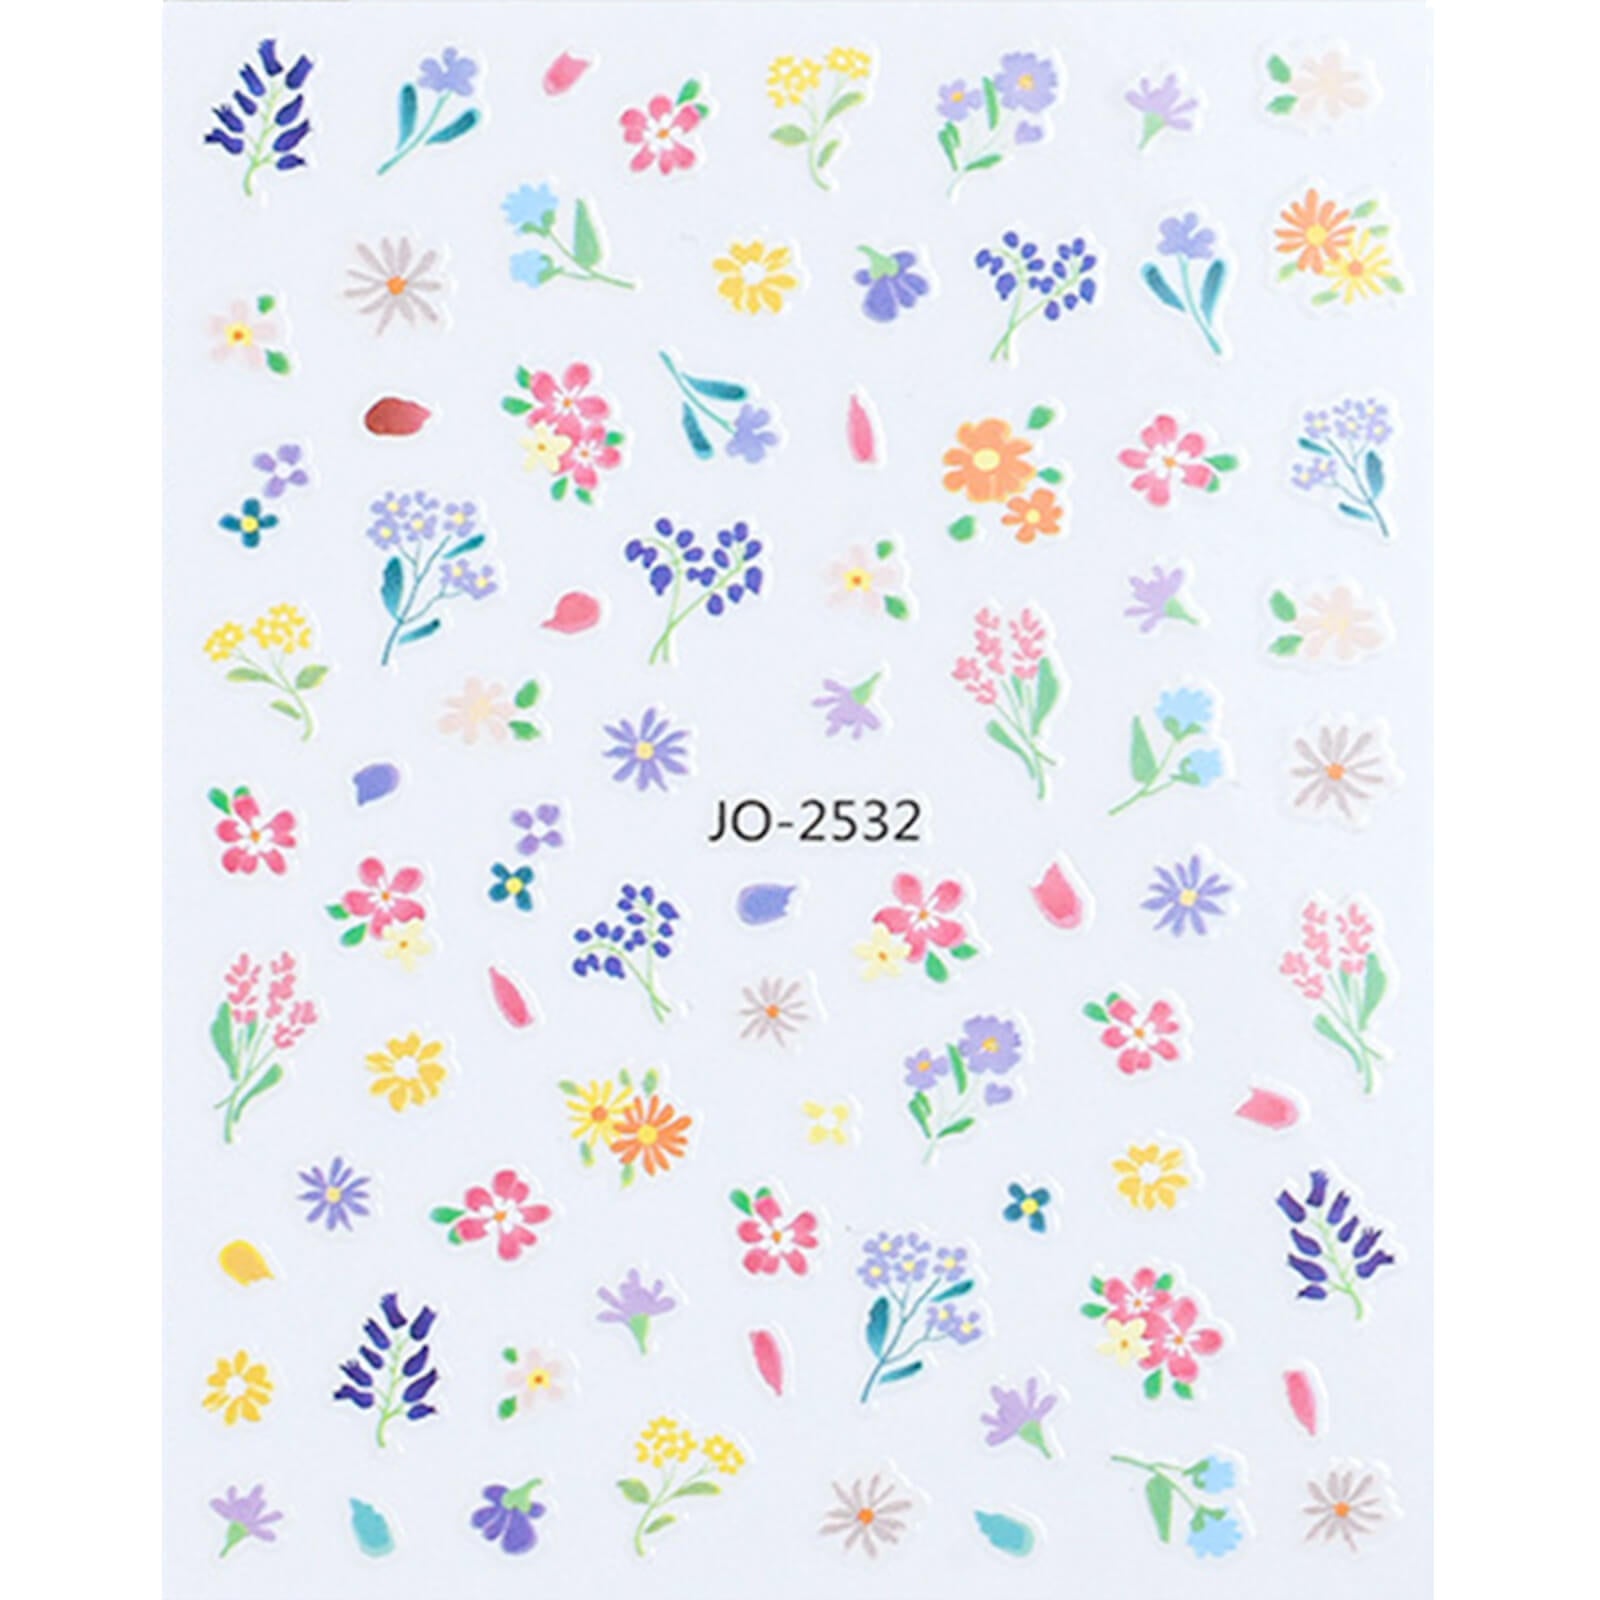      mini-colorful-nail-art-flower-stickers-floral-2532